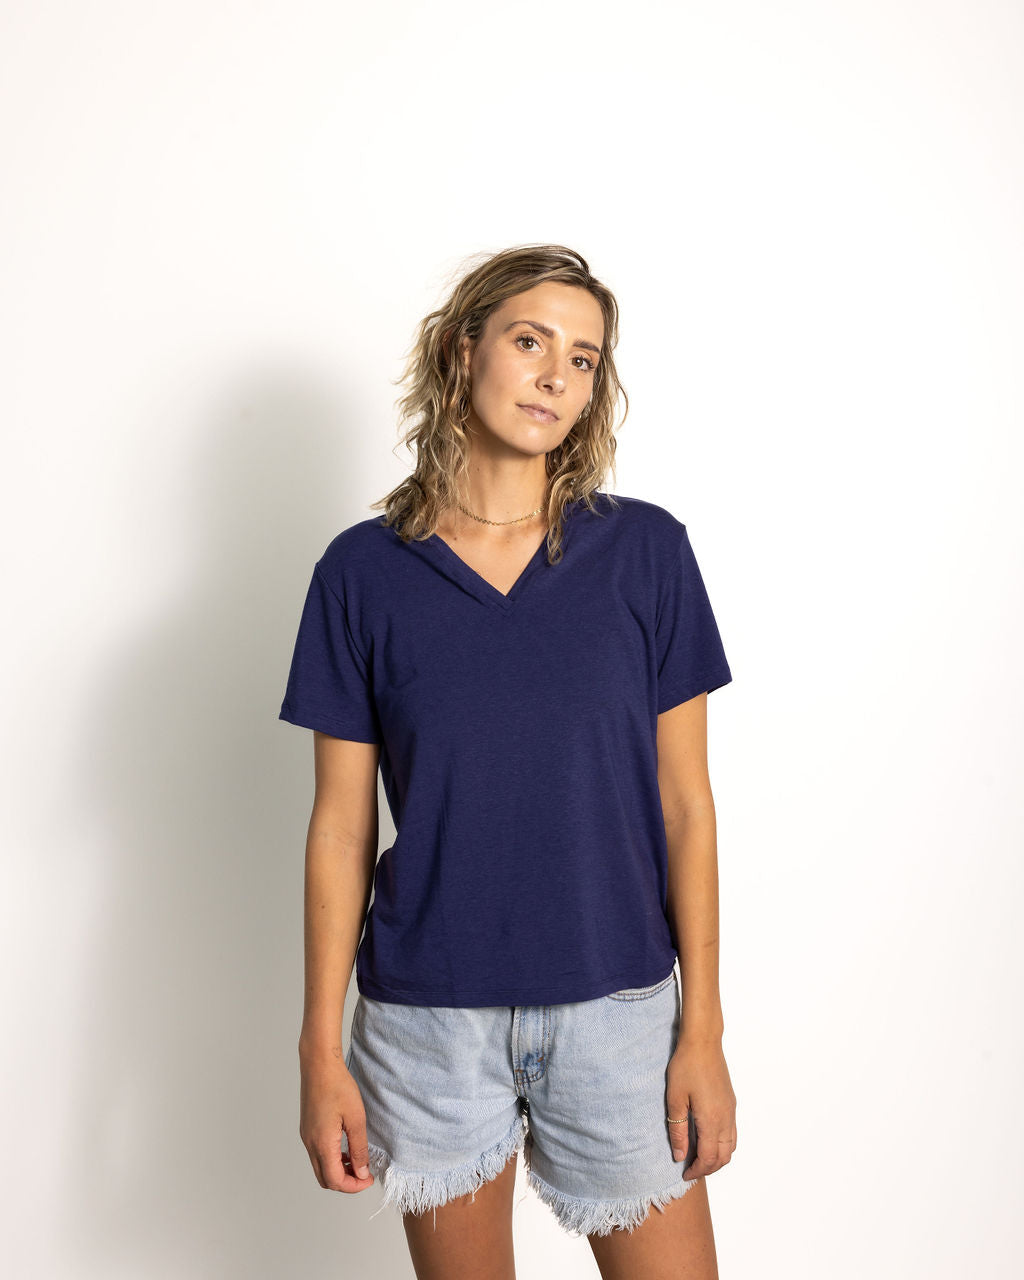 The Jersey V-Neck in Small